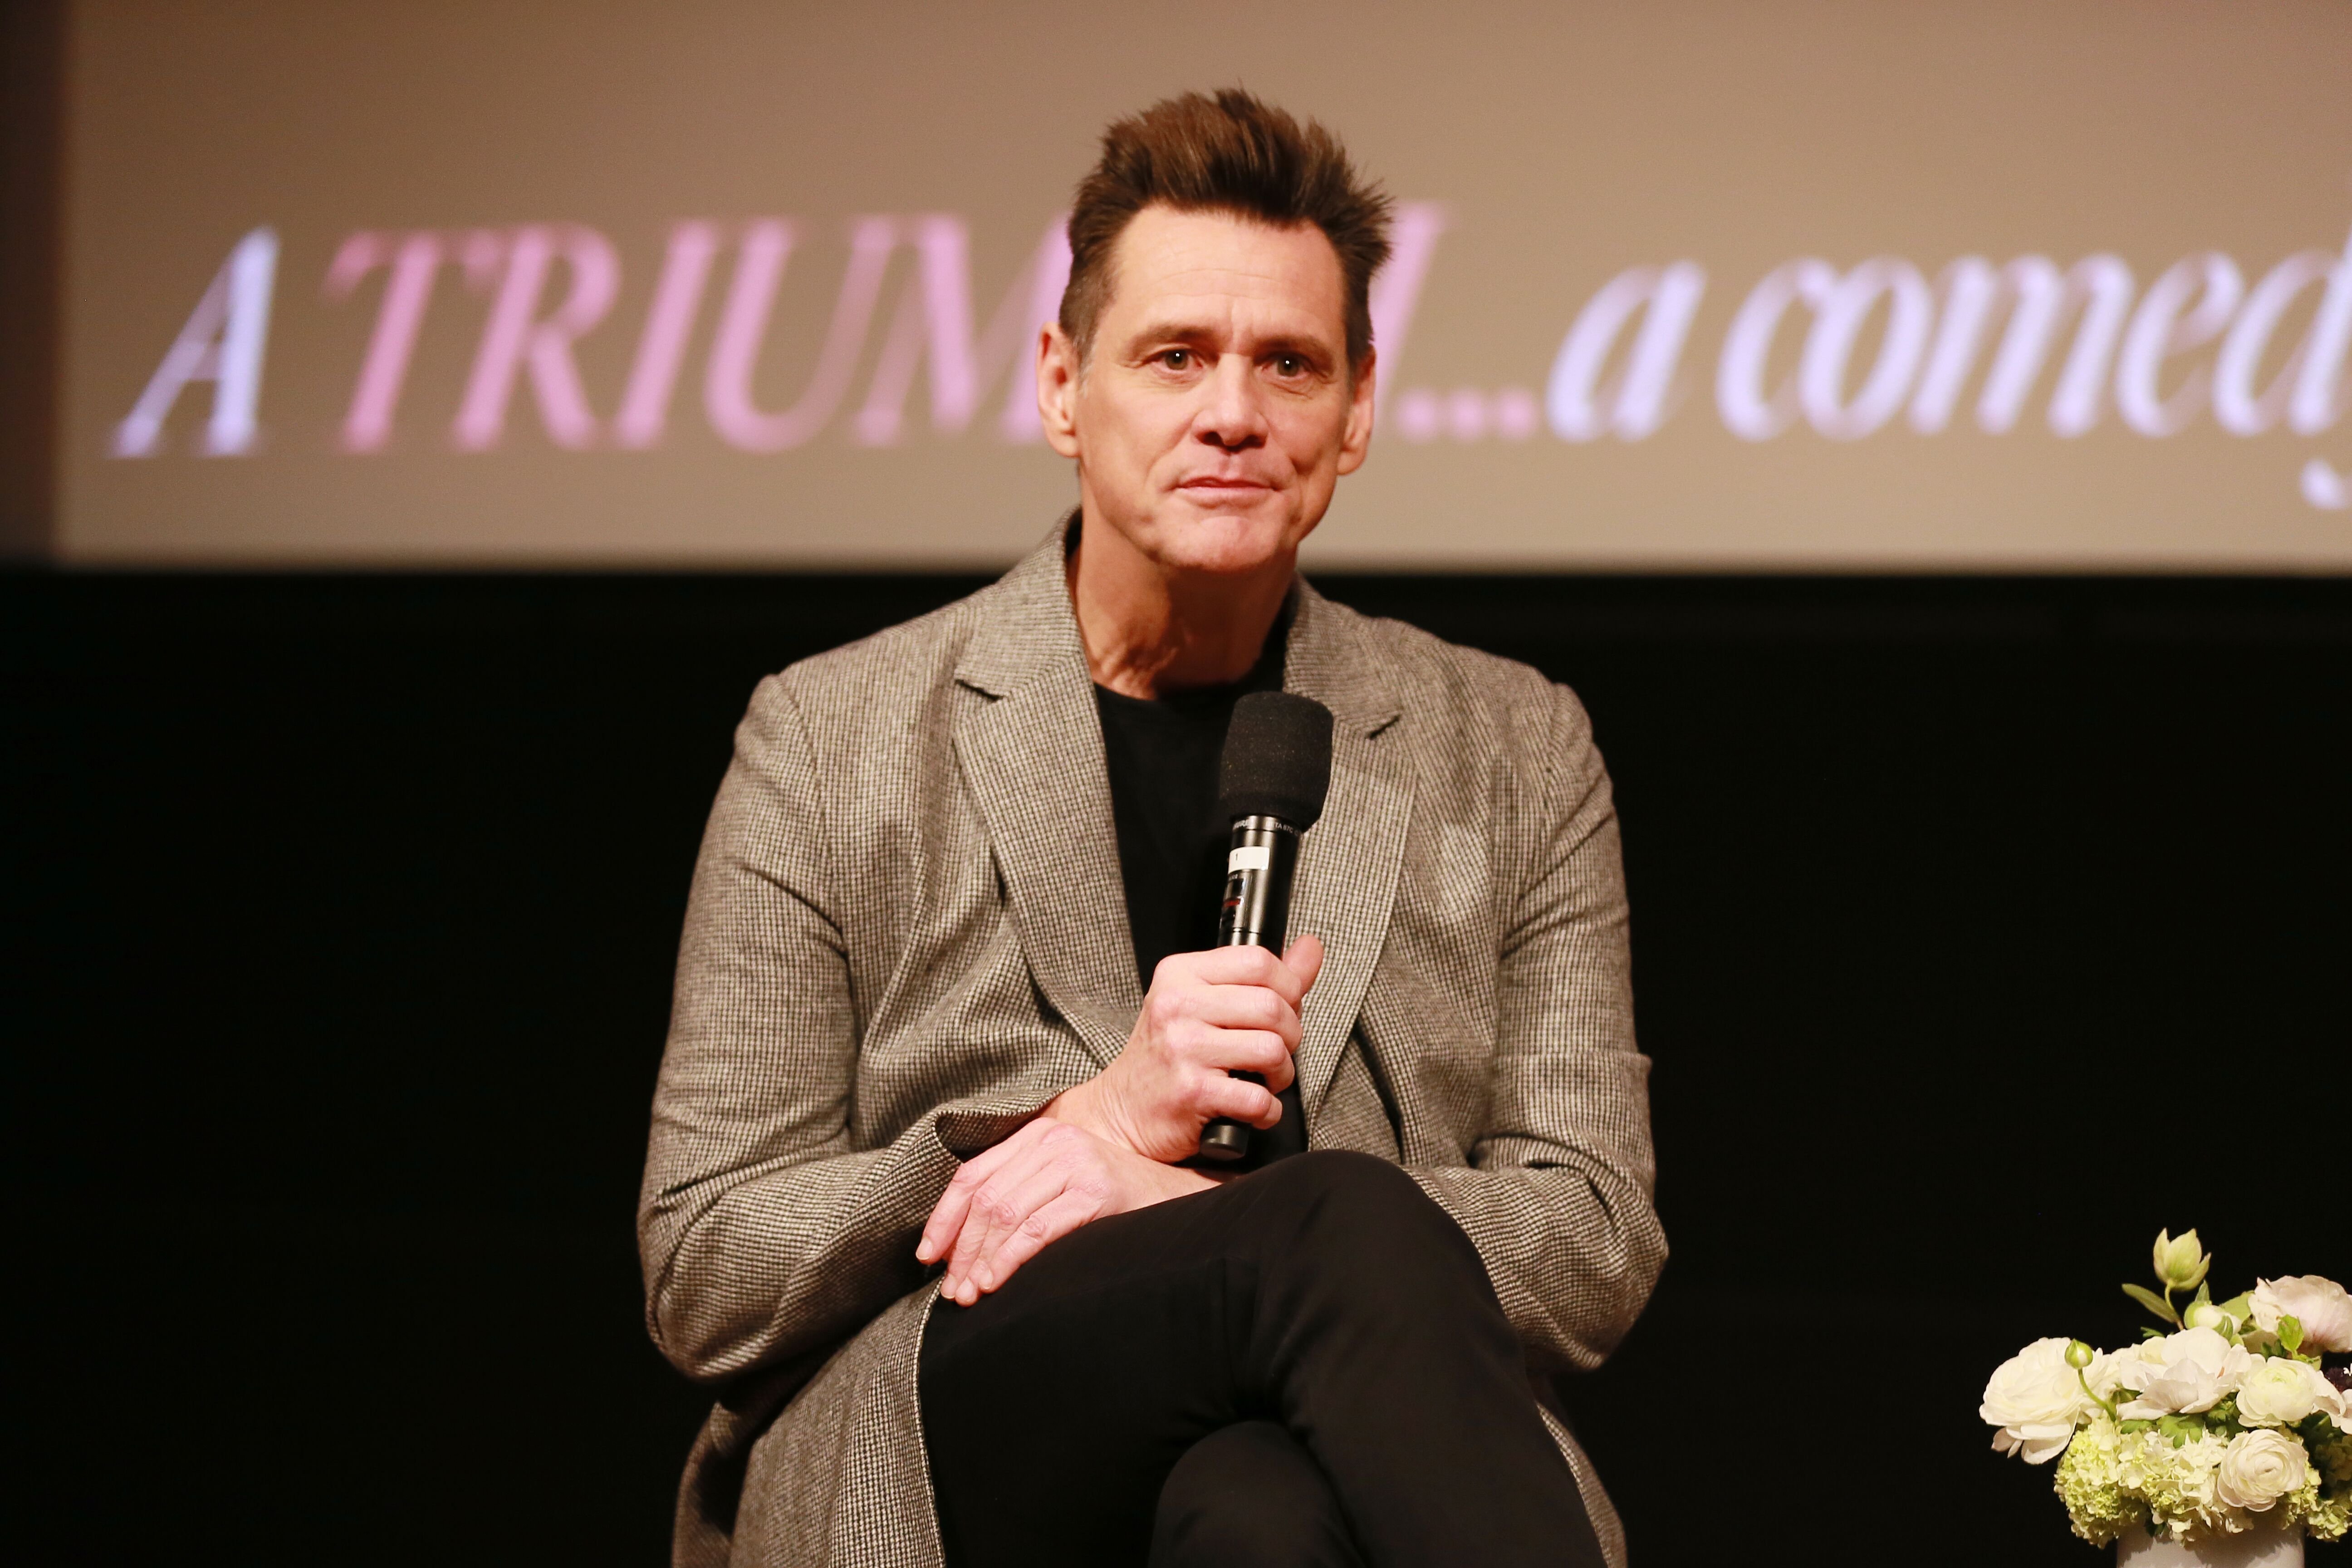 Jim Carrey speaks on stage at the For Your Consideration Screening Of Showtime's "Kidding." | Source: Getty Images